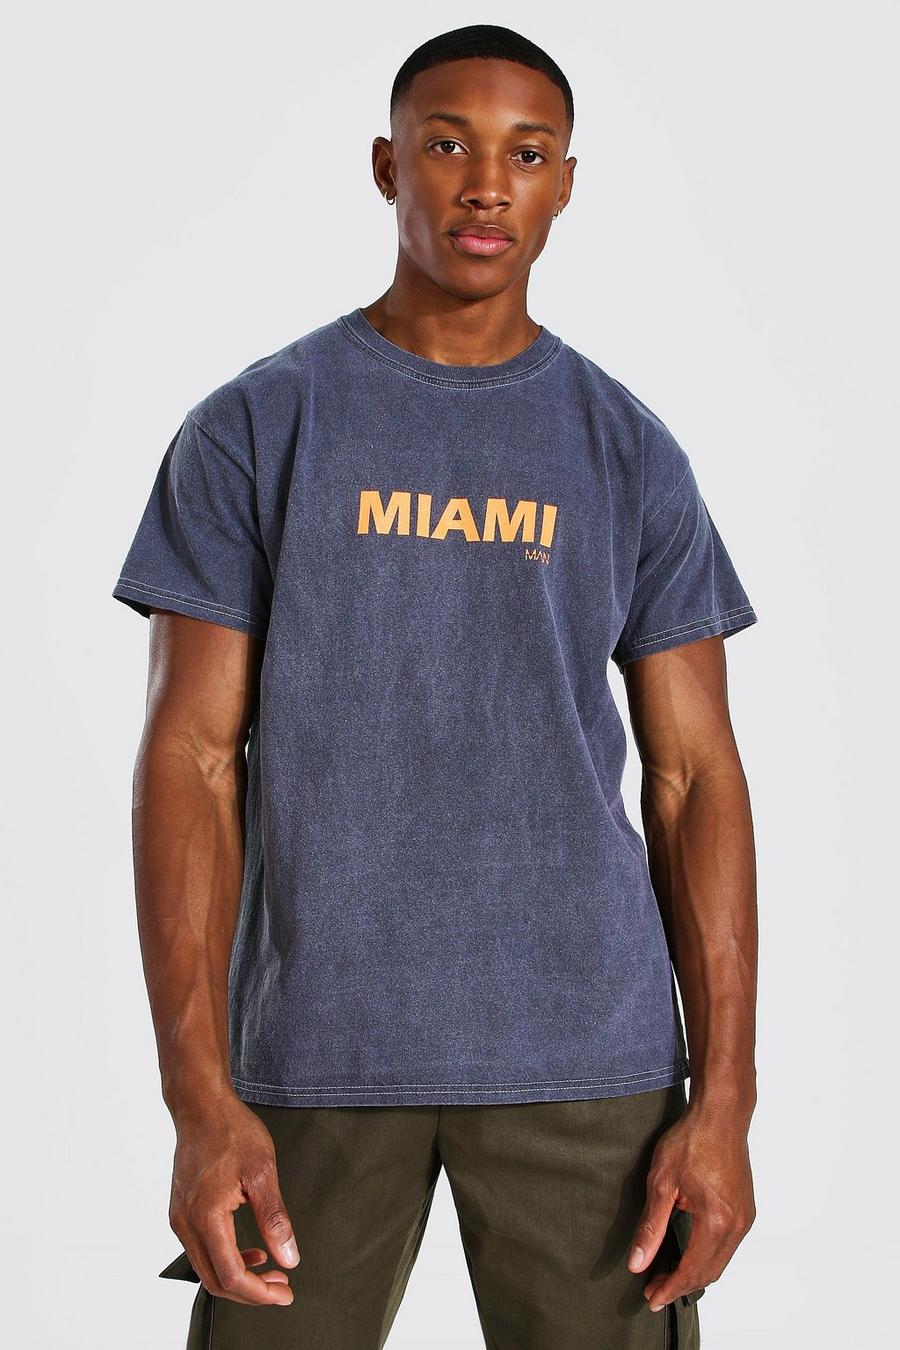 Charcoal grey Oversized Overdyed Miami Print T-shirt image number 1